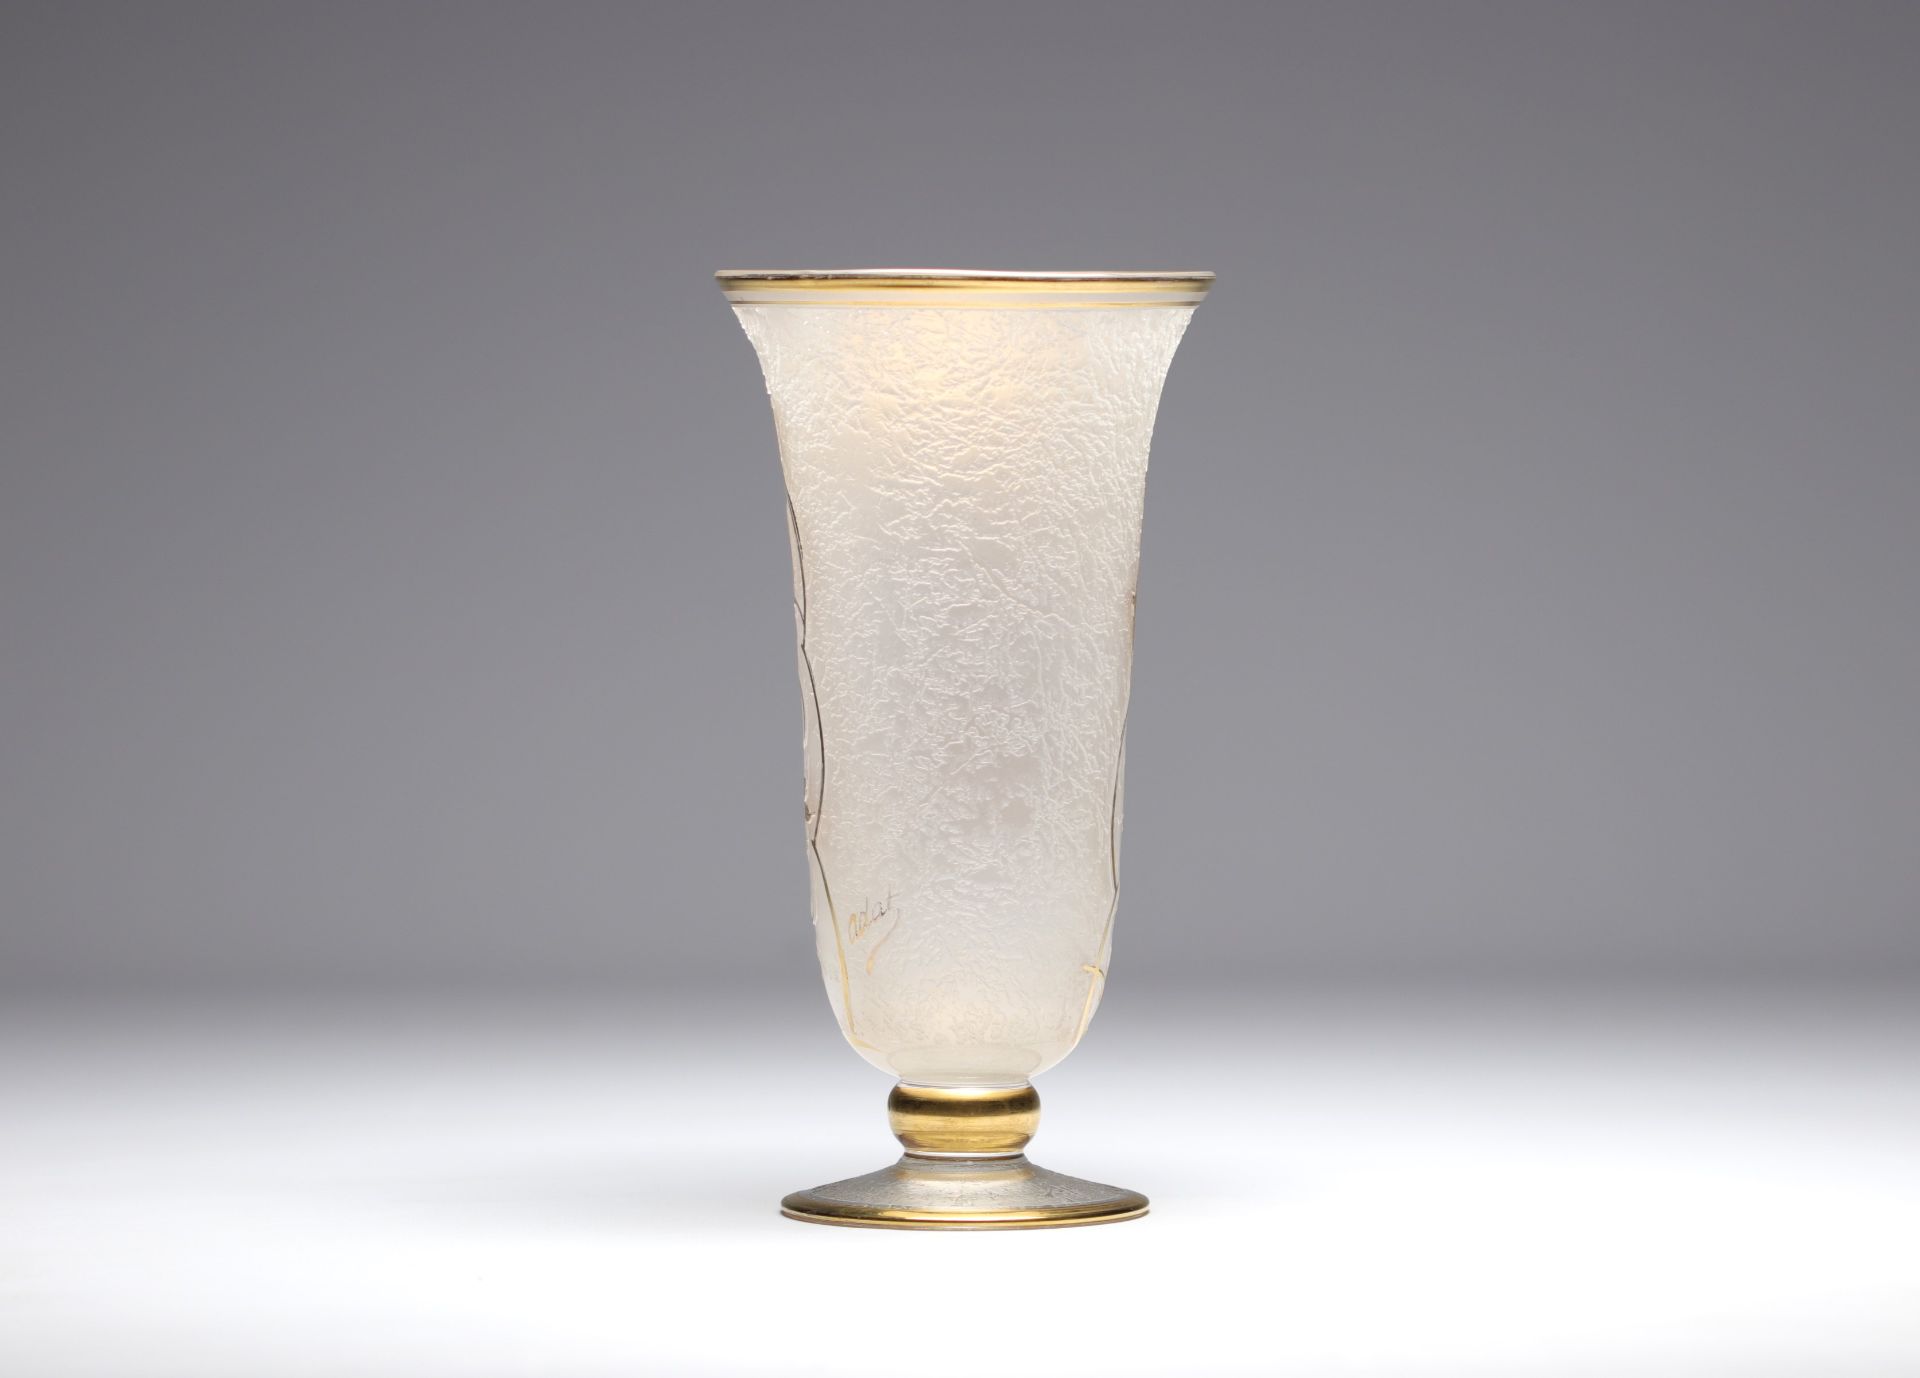 Adat - Art Deco vase in frosted acid-etched glass with gold highlights depicting Strasbourg Cathedra - Bild 2 aus 3